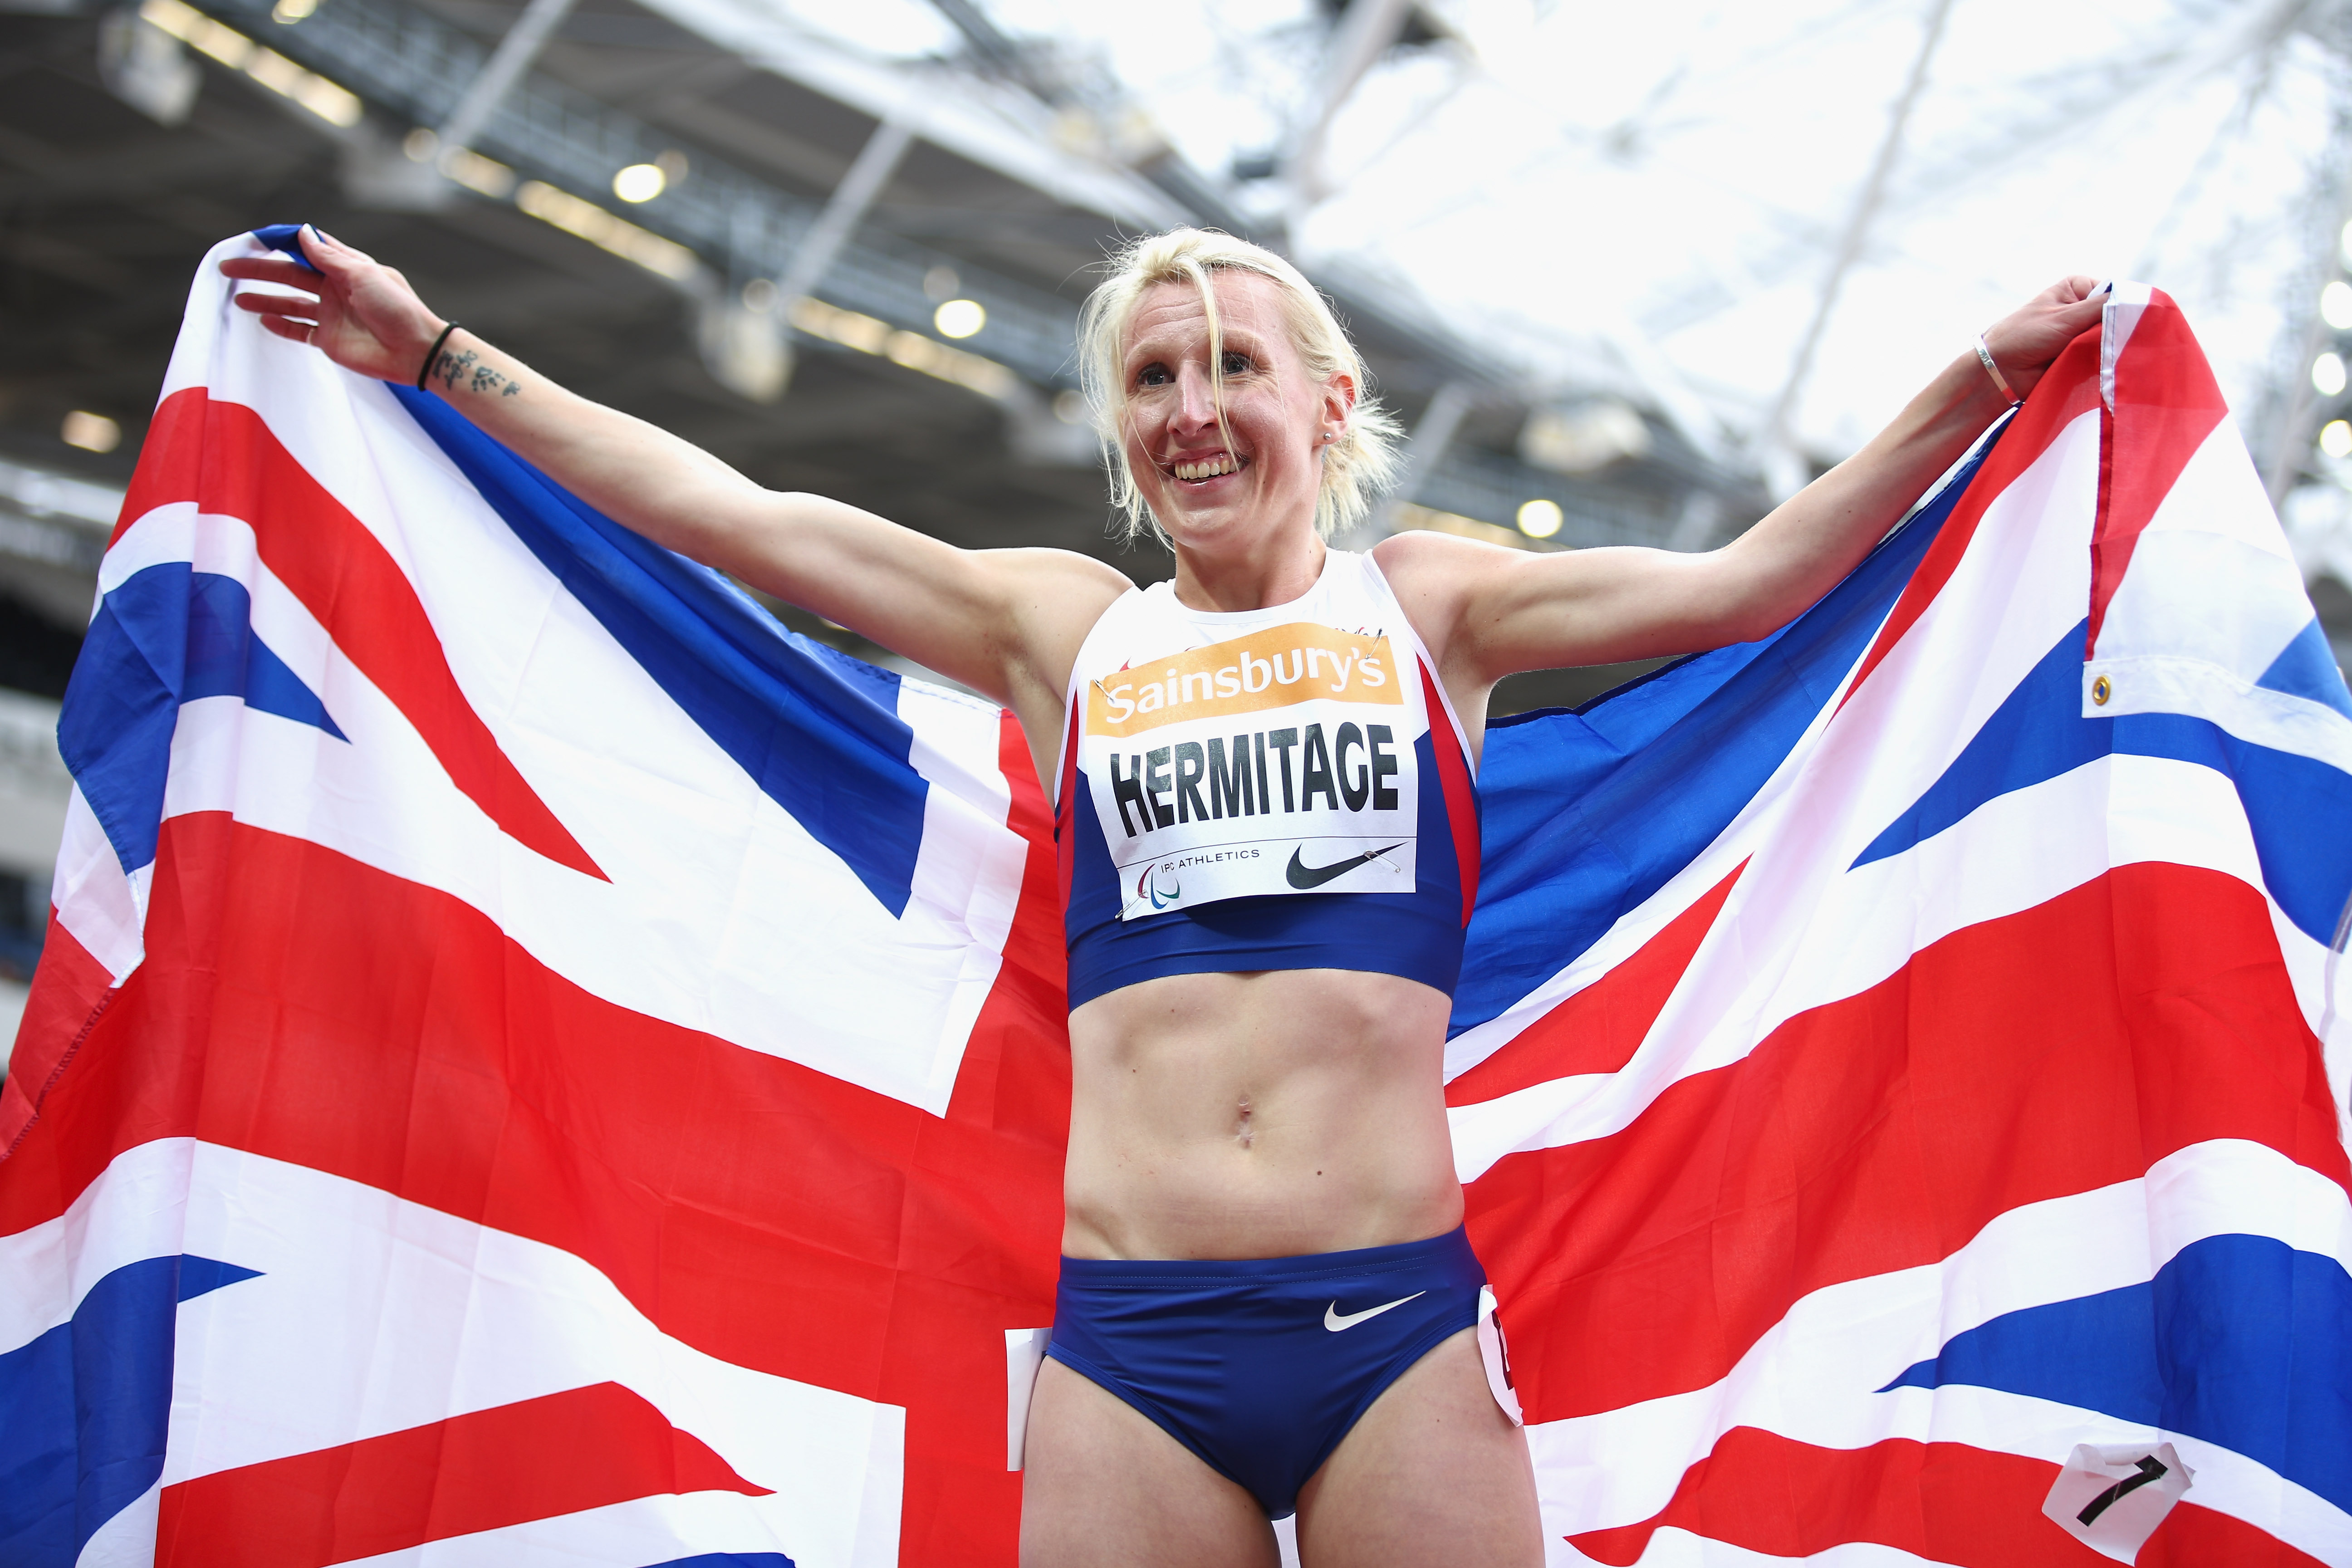 Great Britain's Hermitage strikes gold with another world record